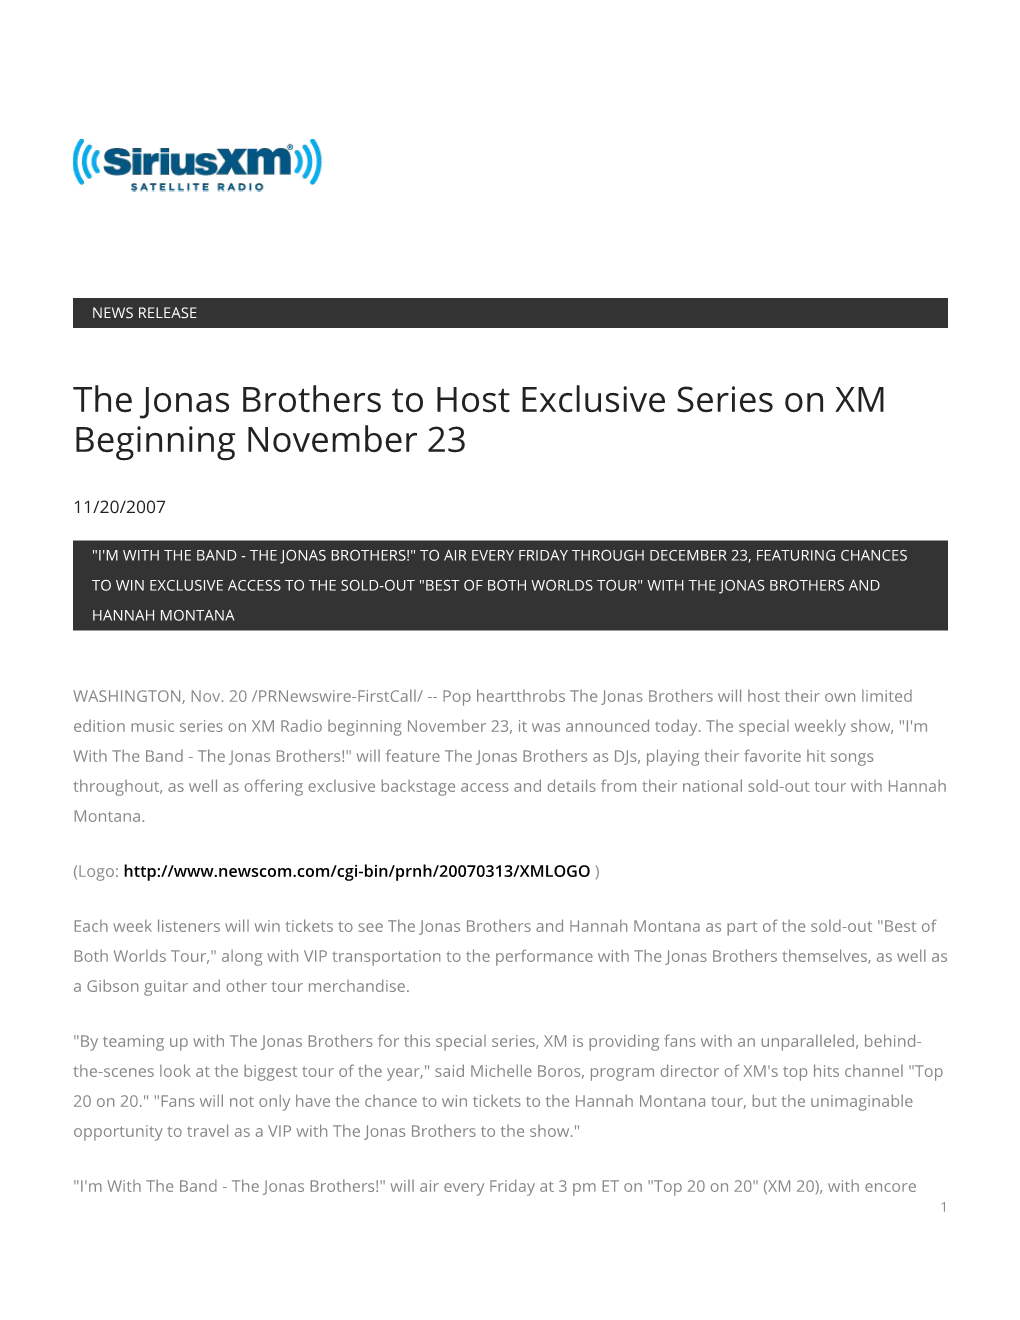 The Jonas Brothers to Host Exclusive Series on XM Beginning November 23